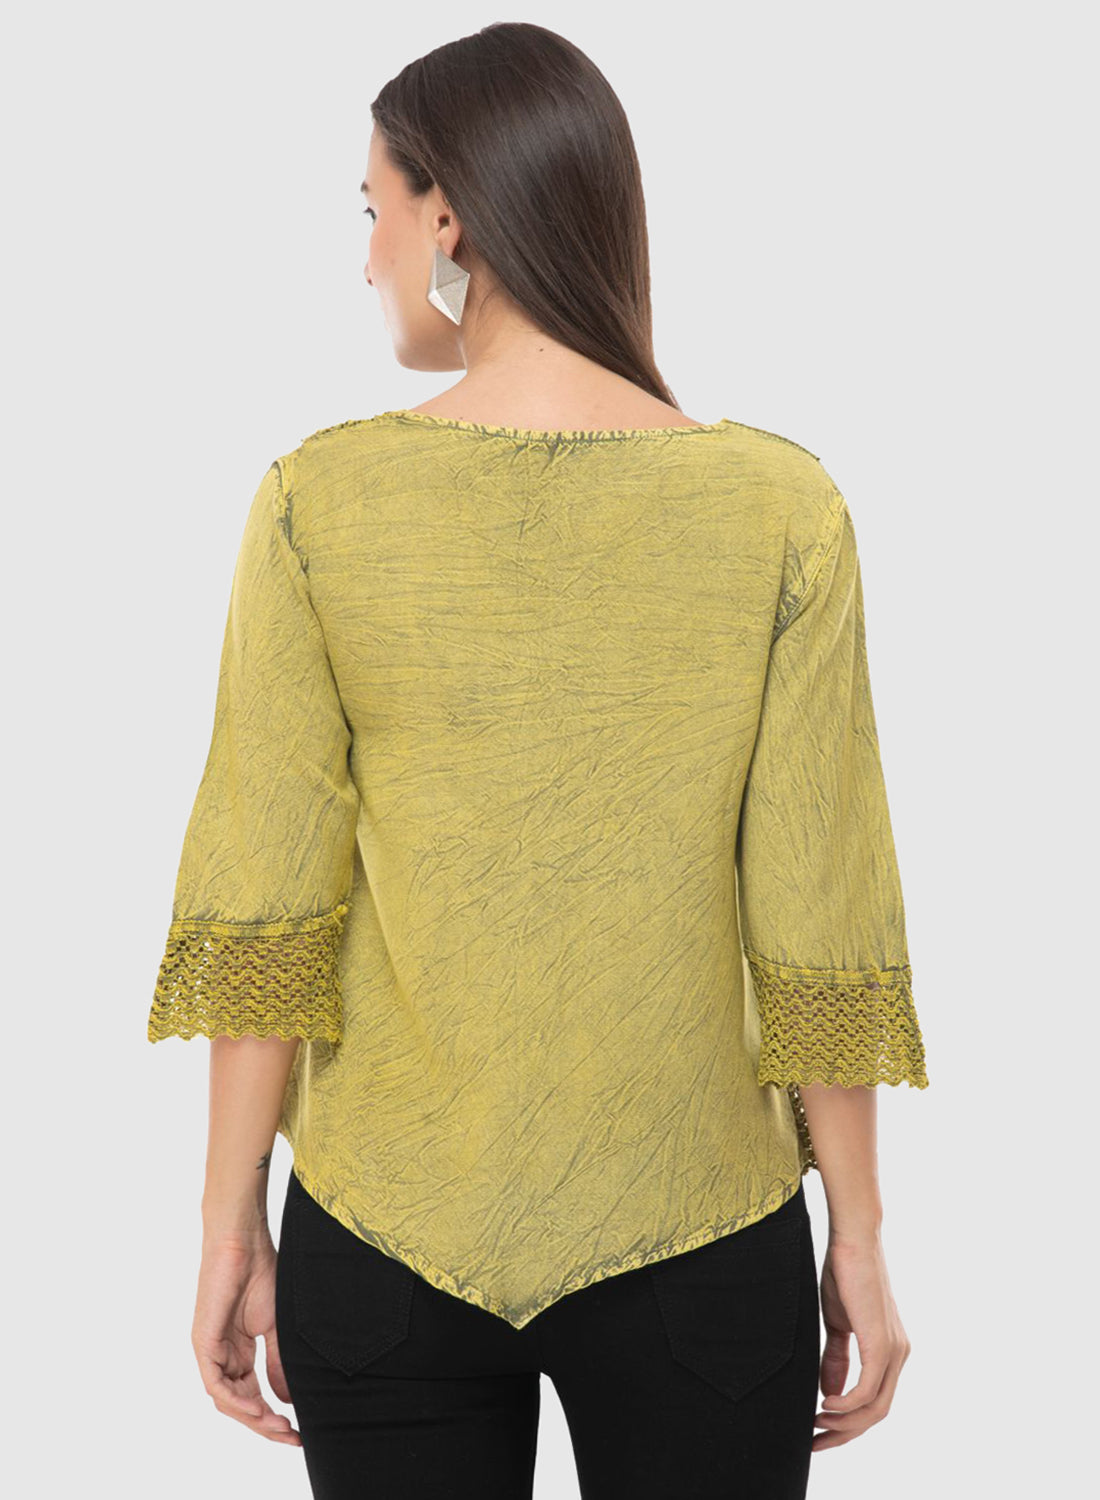 Women Top Yellow Green Casual Regular Fit 3/4 Sleeve Embroidery Work